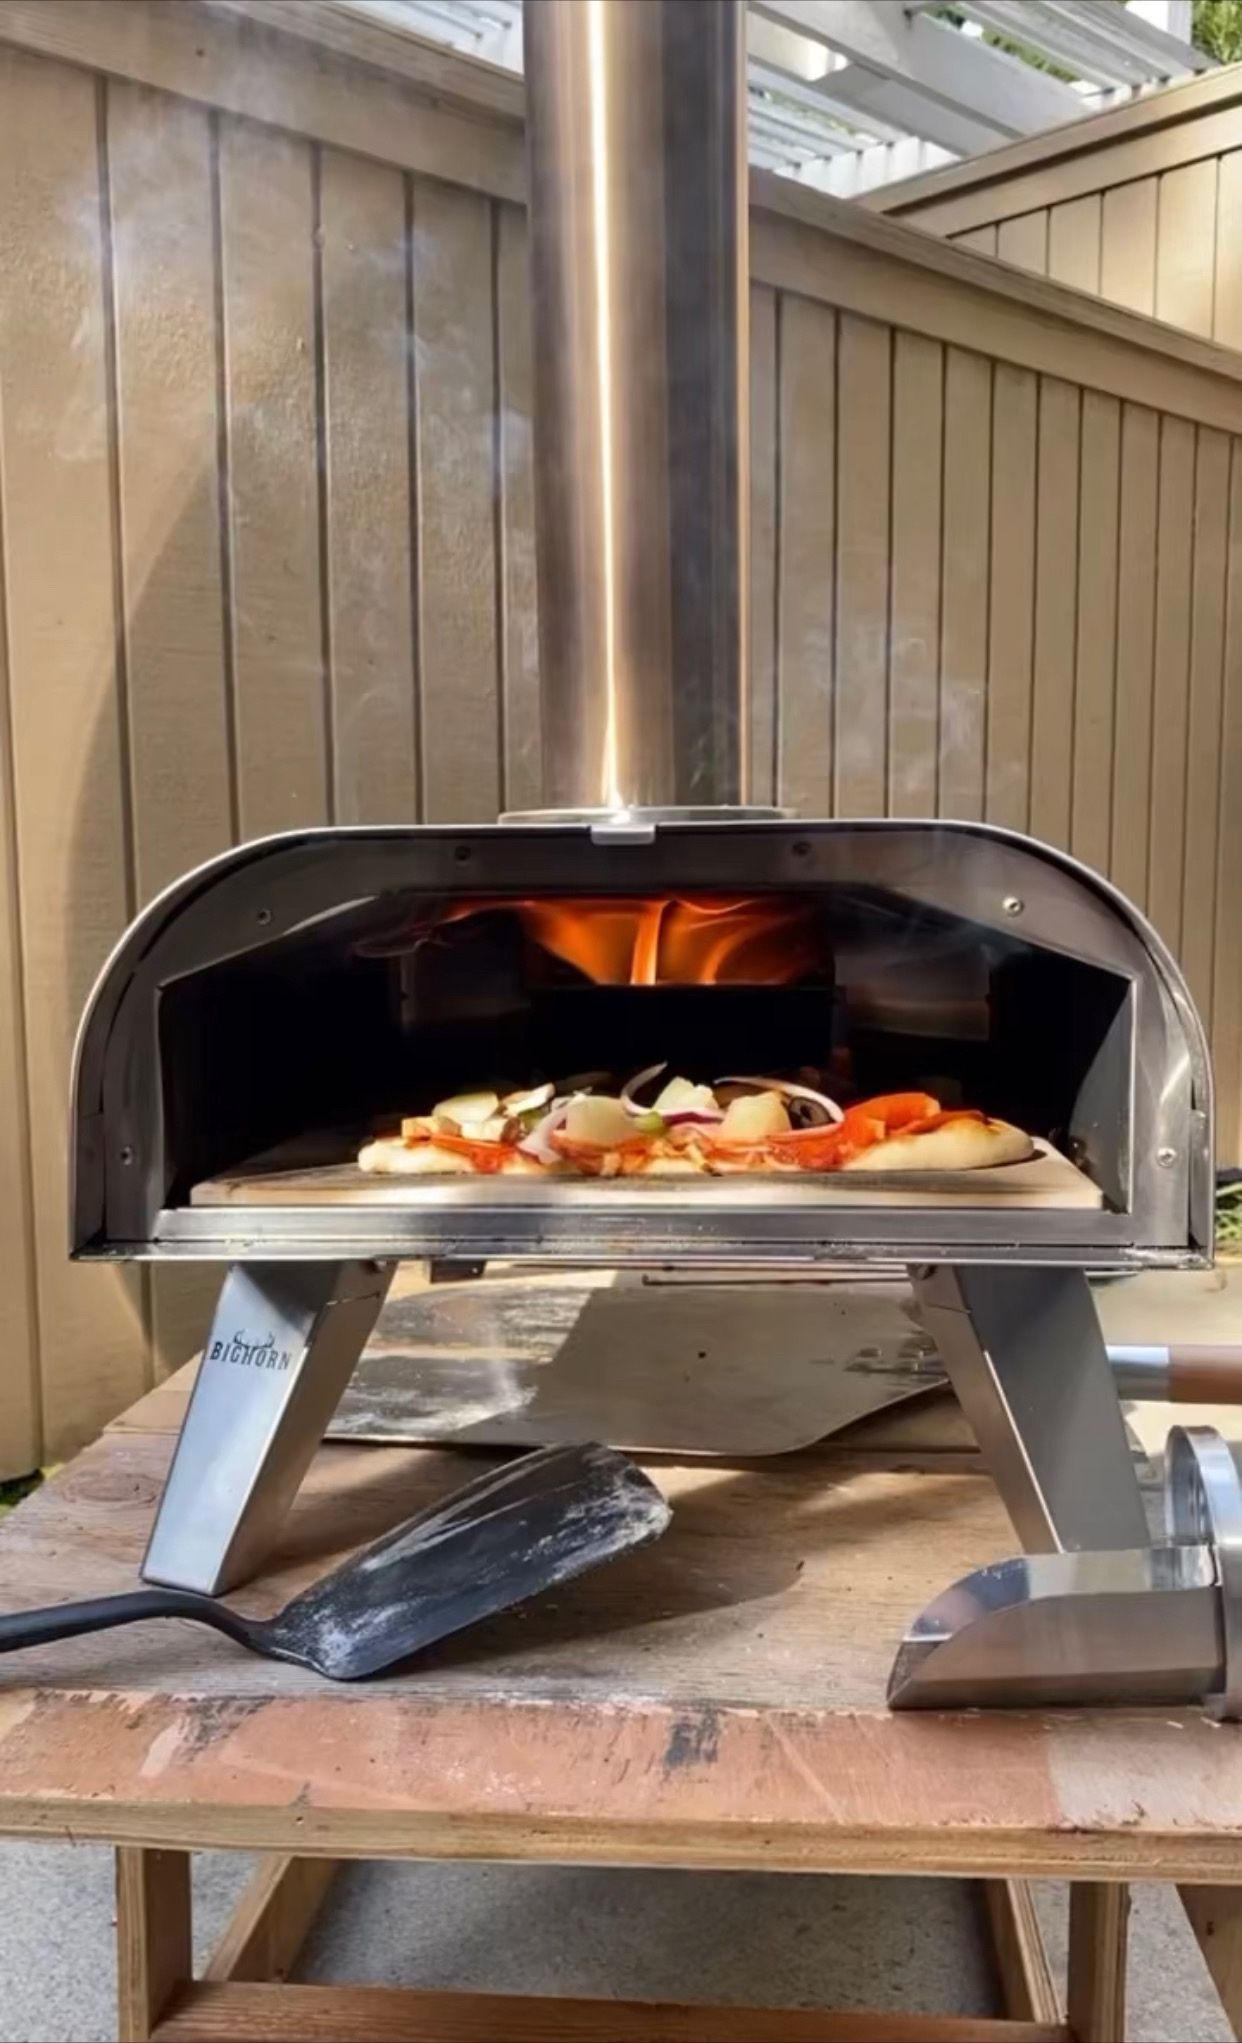 5 Outdoor Pizza Ovens: Put Your Pizza-Making Skills to the Test!